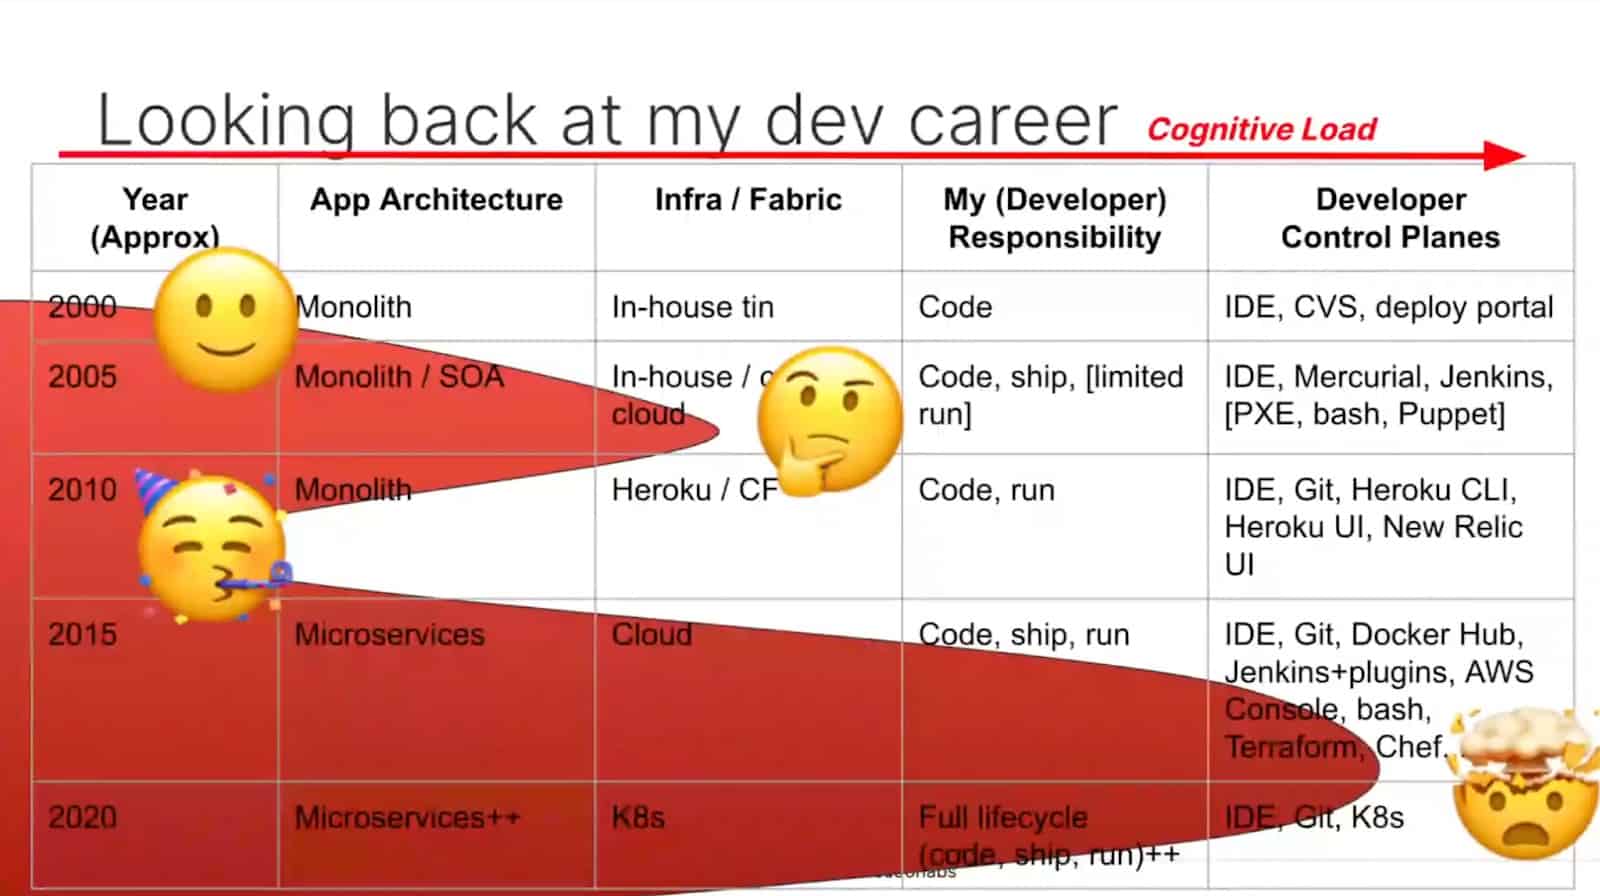 Table shows Daniel Bryant's dev career from 2000 to 2020